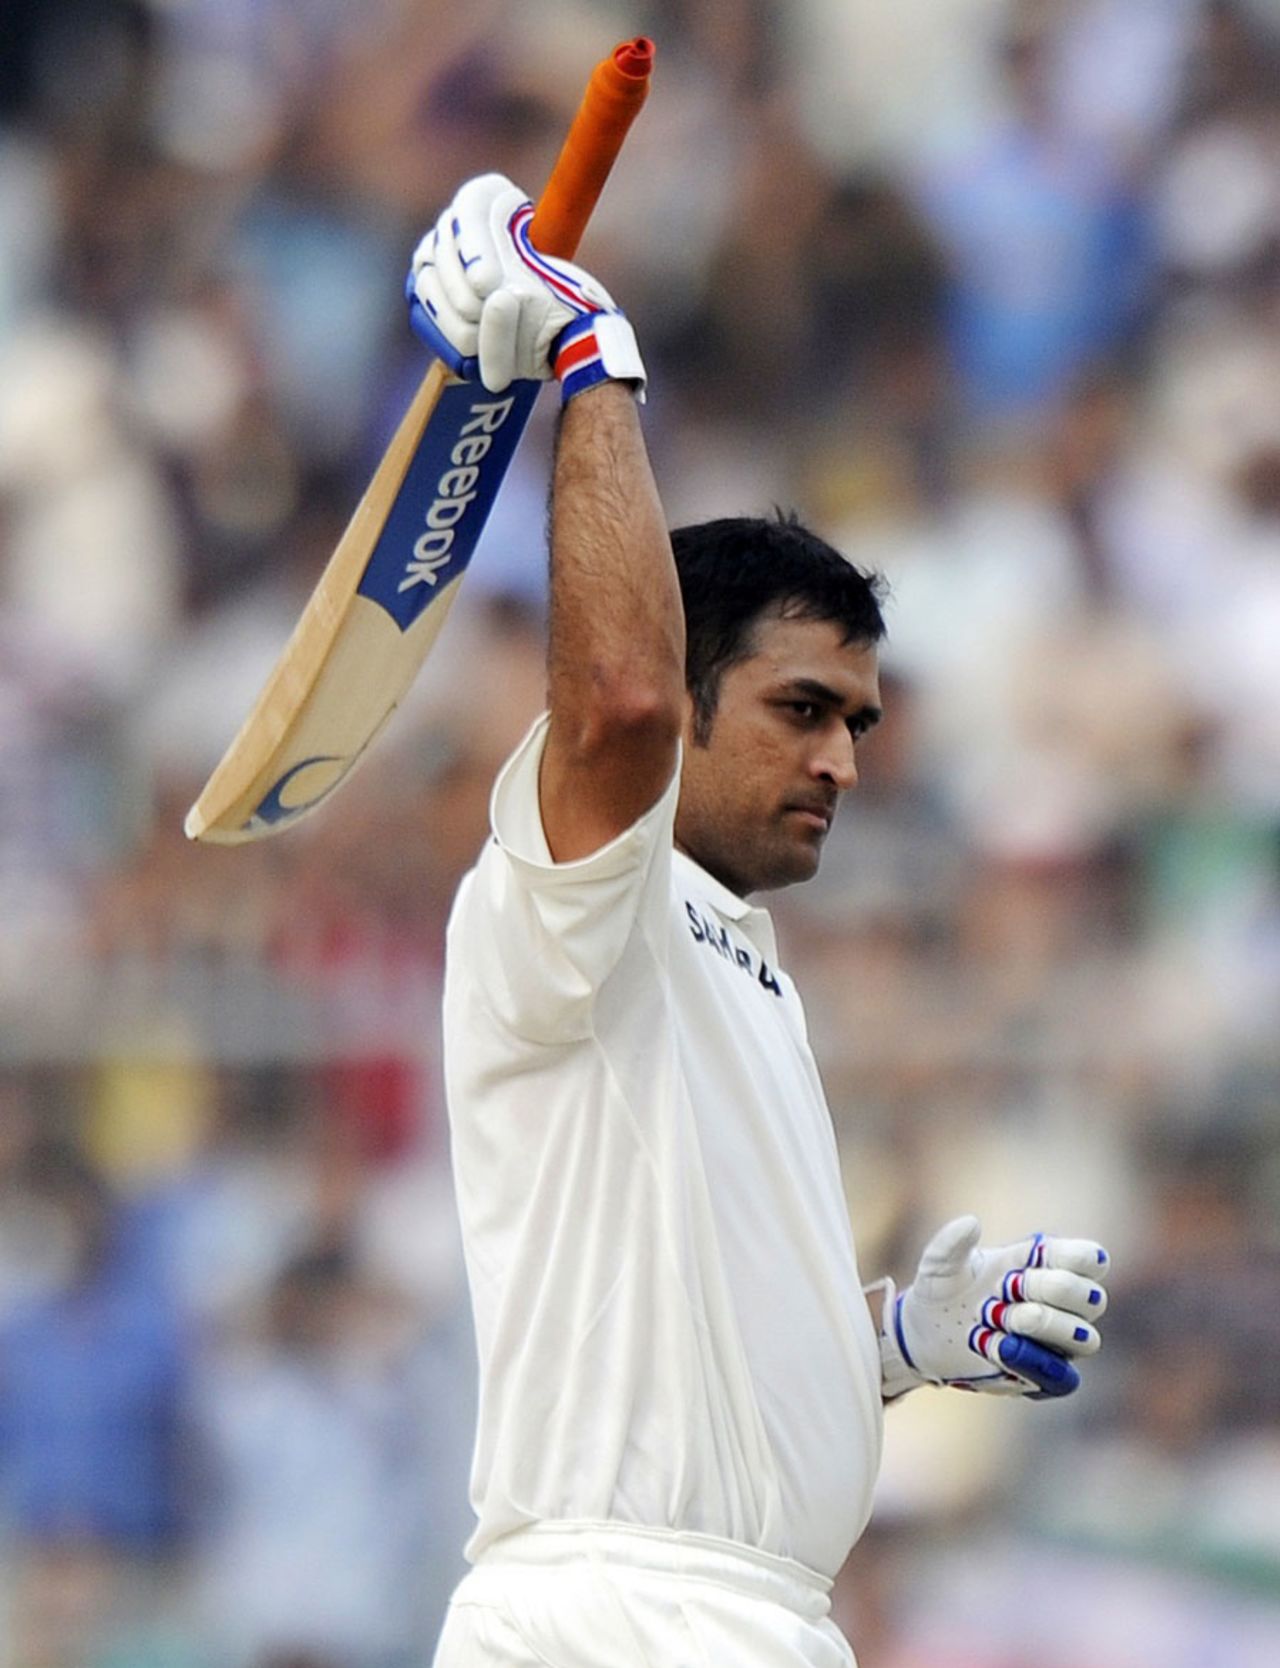 MS Dhoni raises his bat after reaching his century, India v West Indies, 2nd Test, Kolkata, 2nd day, November 15, 2011